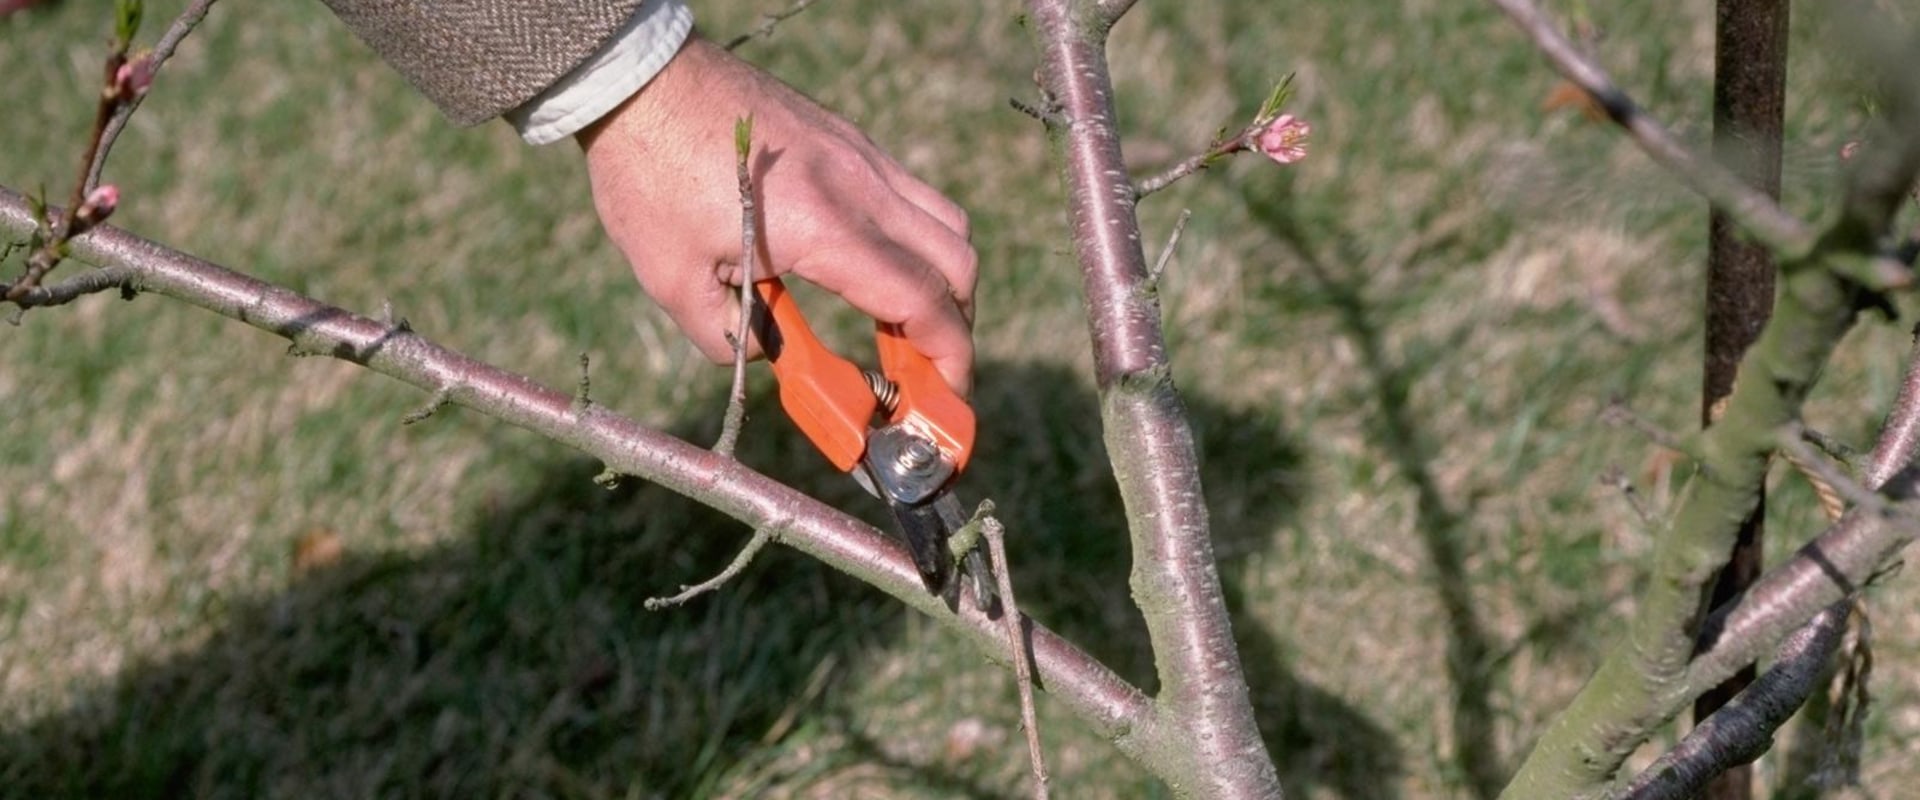 Crown Thinning Pruning: A Comprehensive Overview